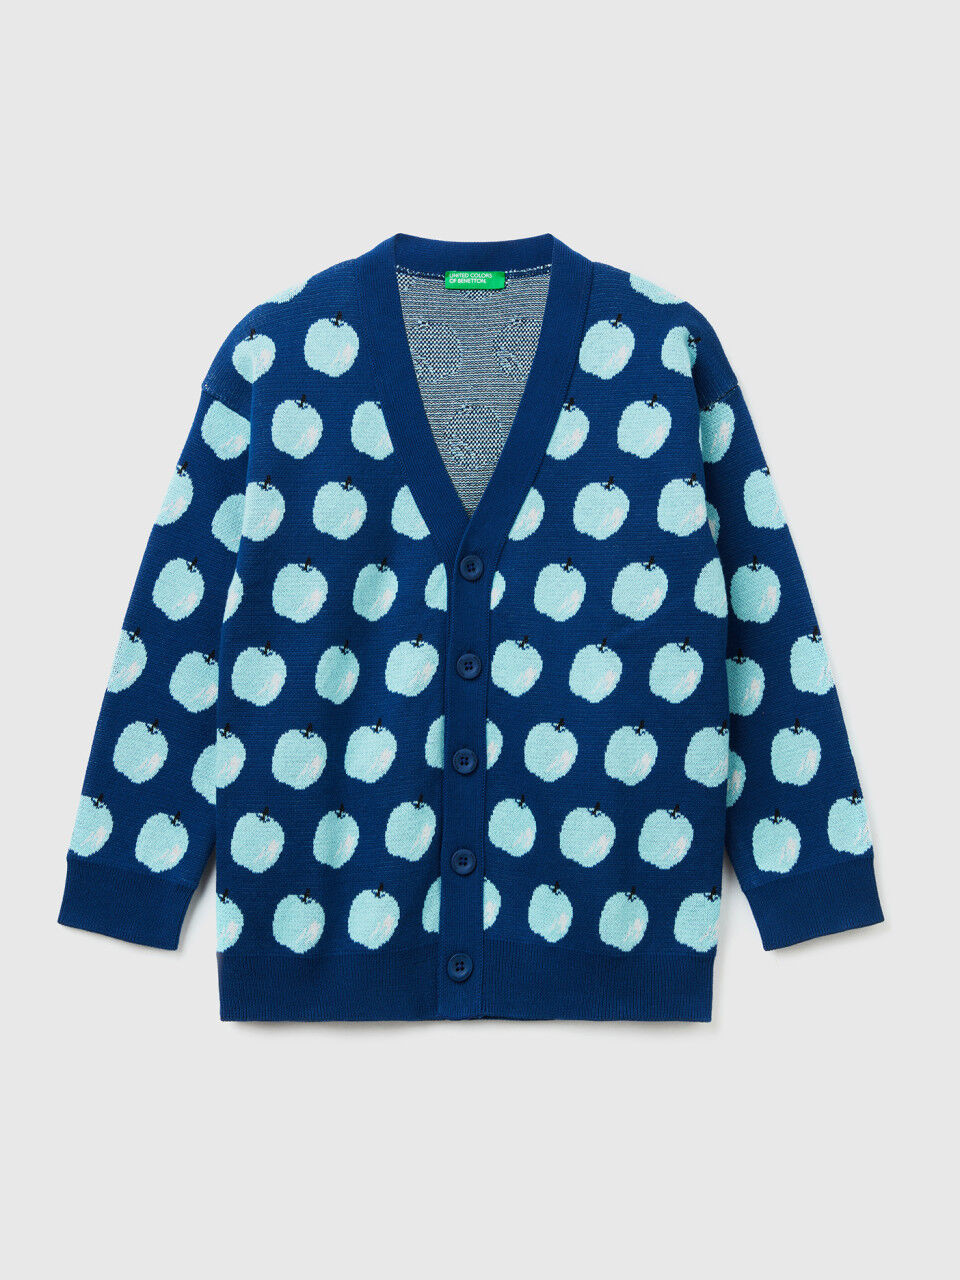 Blue cardigan with apple pattern